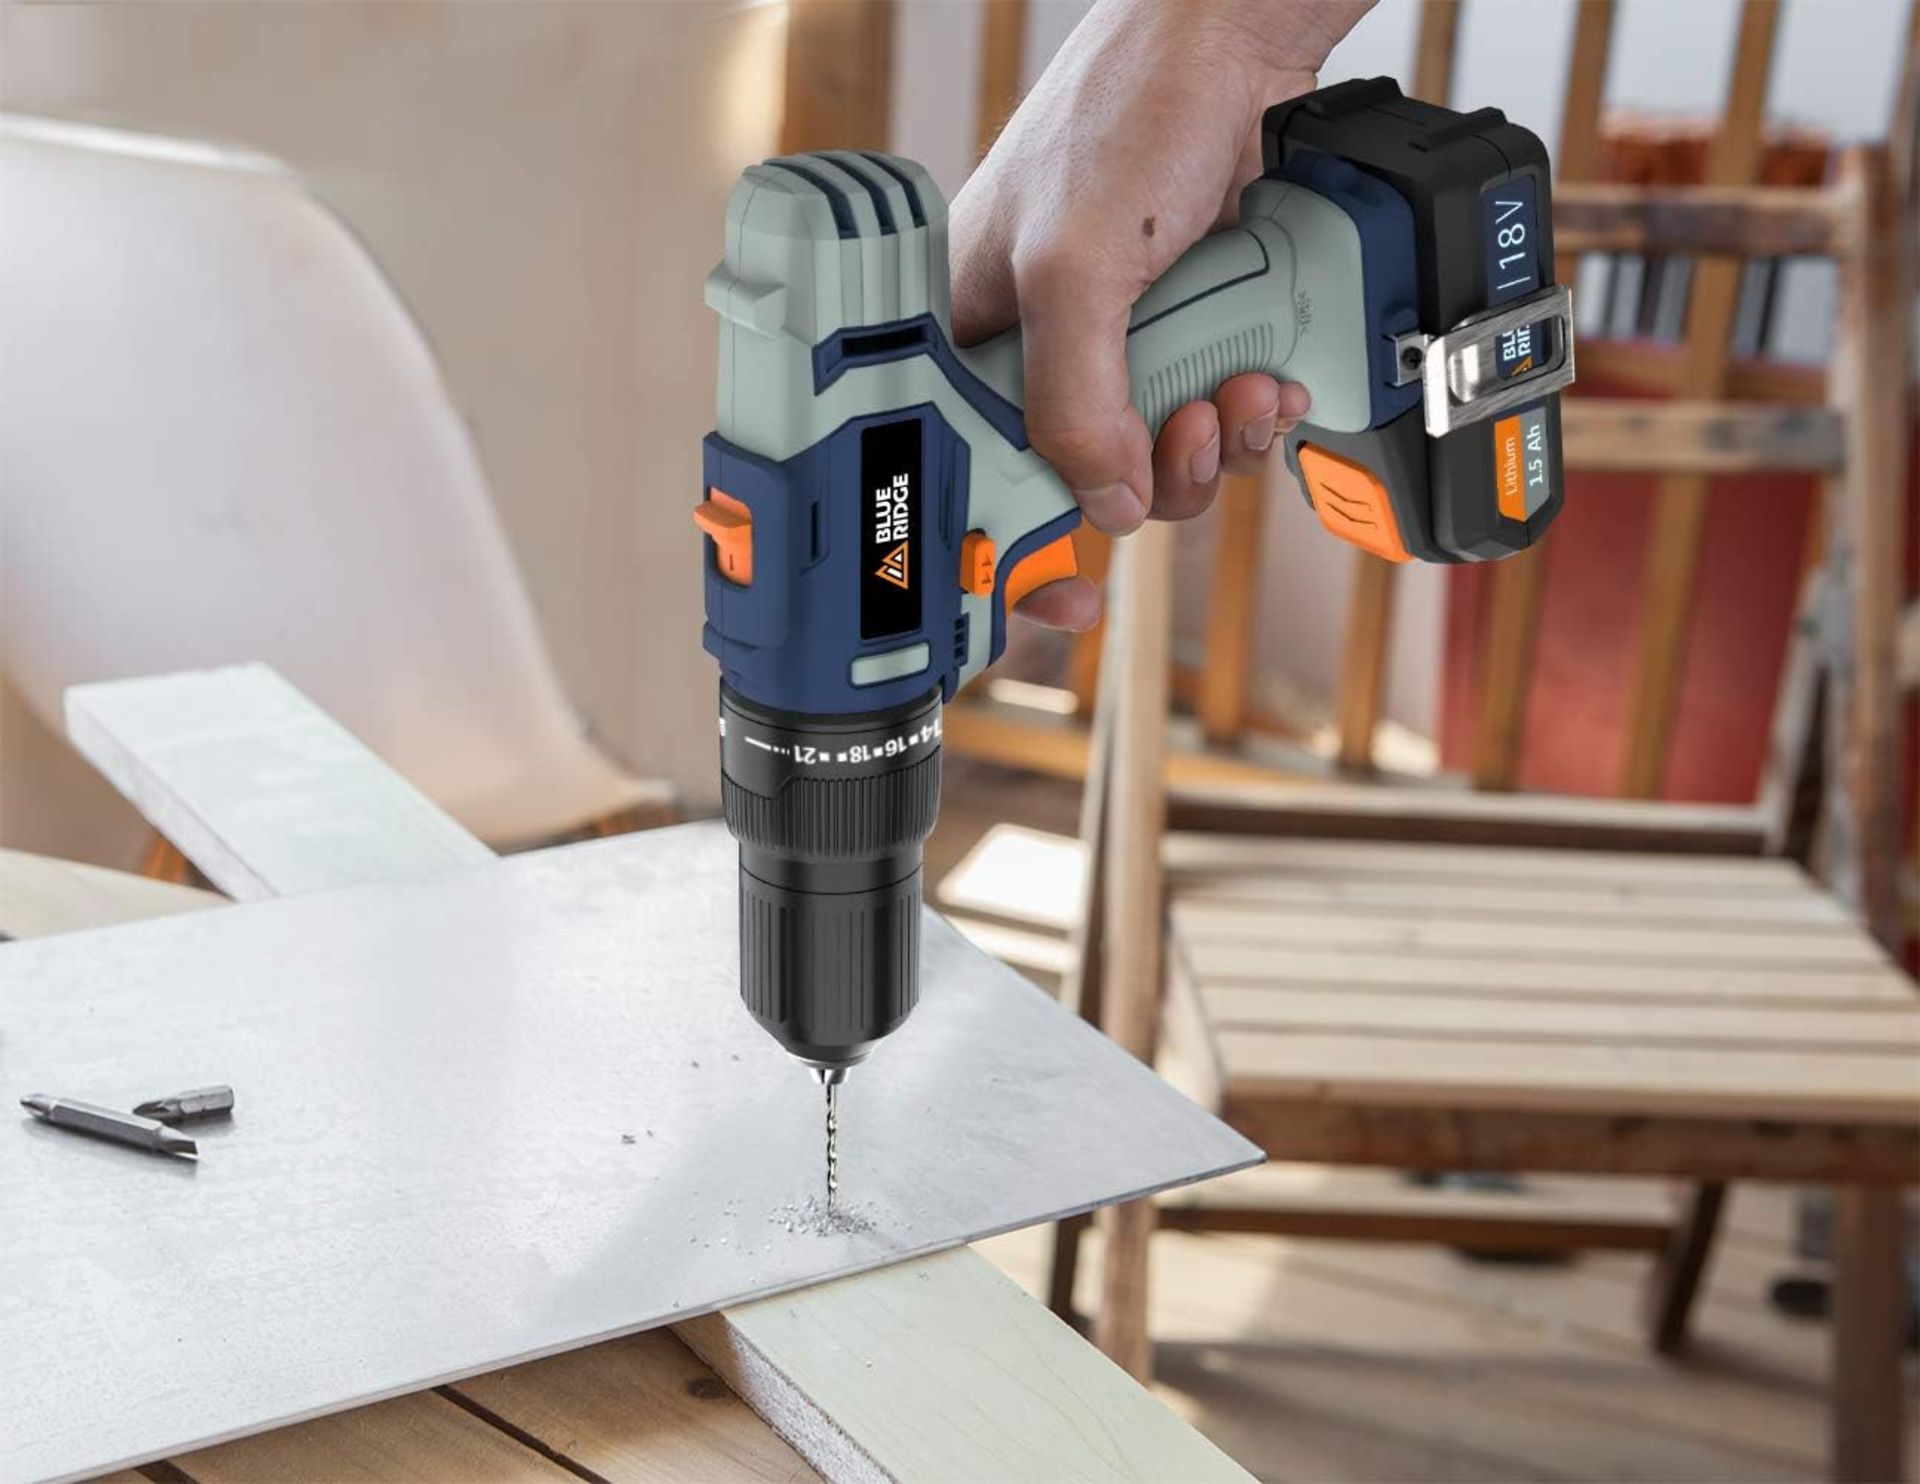 2x NEW & BOXED BLUE RIDGE 18V Cordless Hammer Drill with 2 x 1.5 Ah Li-ion Batteries & 43 Piece - Image 5 of 11